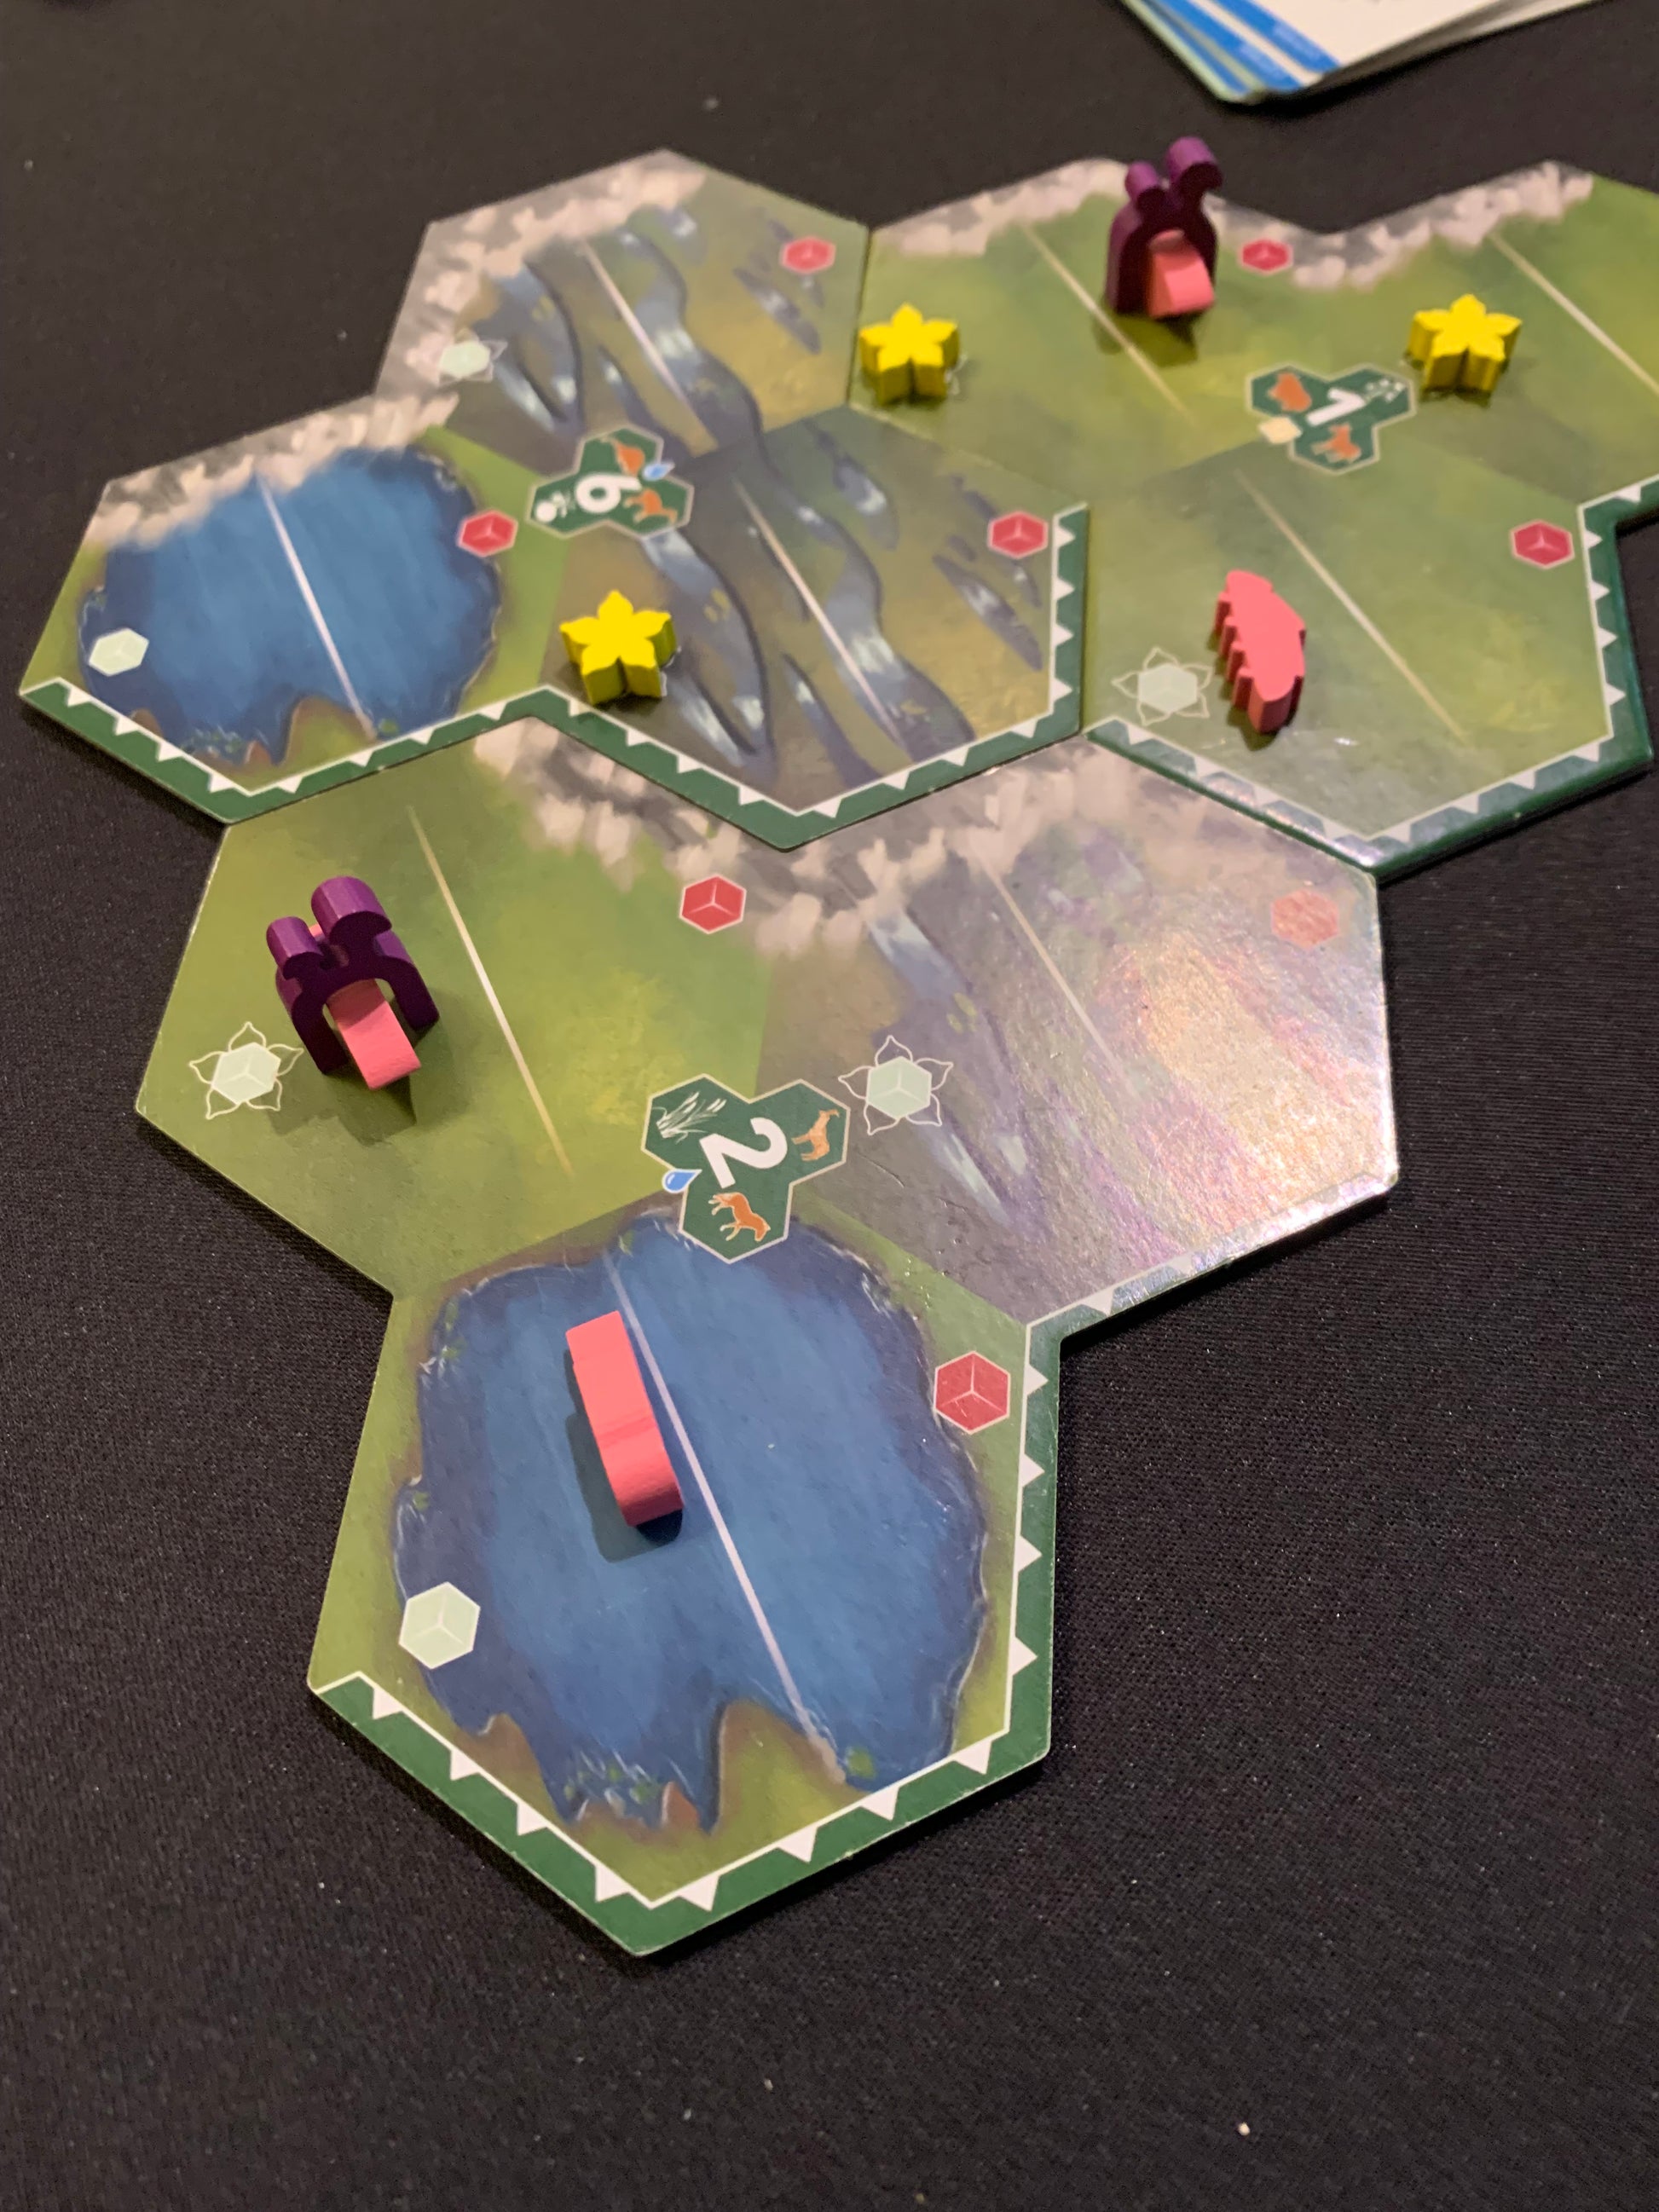 Bios: Mesofauna board game - Craton punchout accompanied by fossil chits and yellow flower tokens